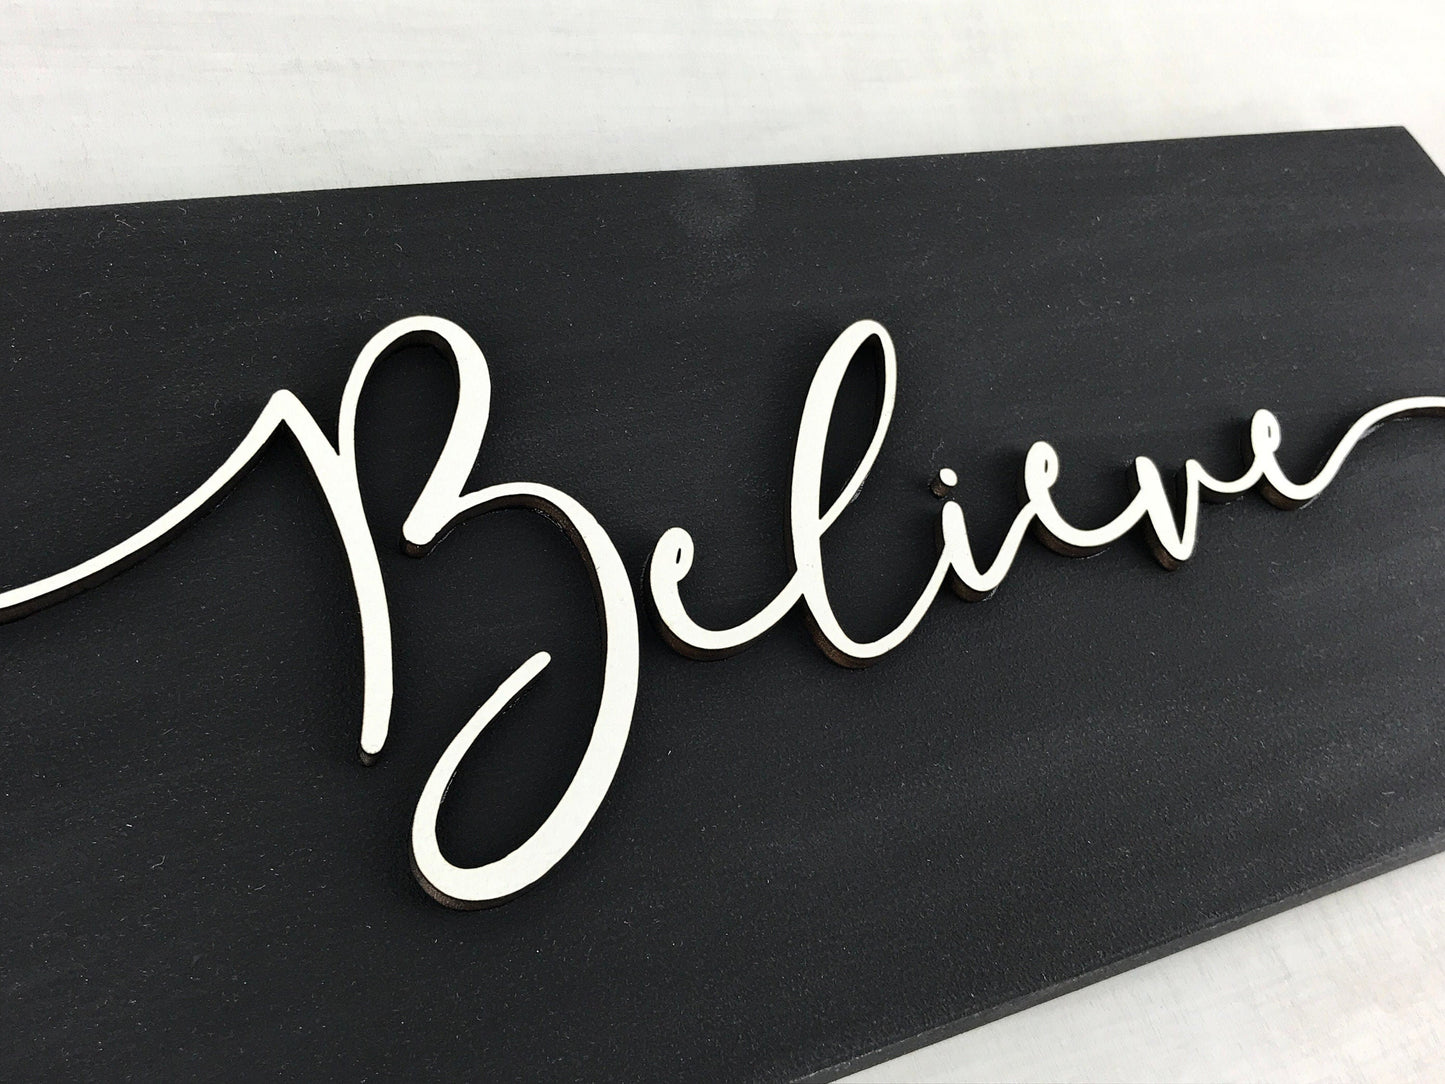 Believe sign, Christmas decorations, 3D holiday decor, holiday wood signs, living room wooden sign wall art hanging, fireplace mantel decor